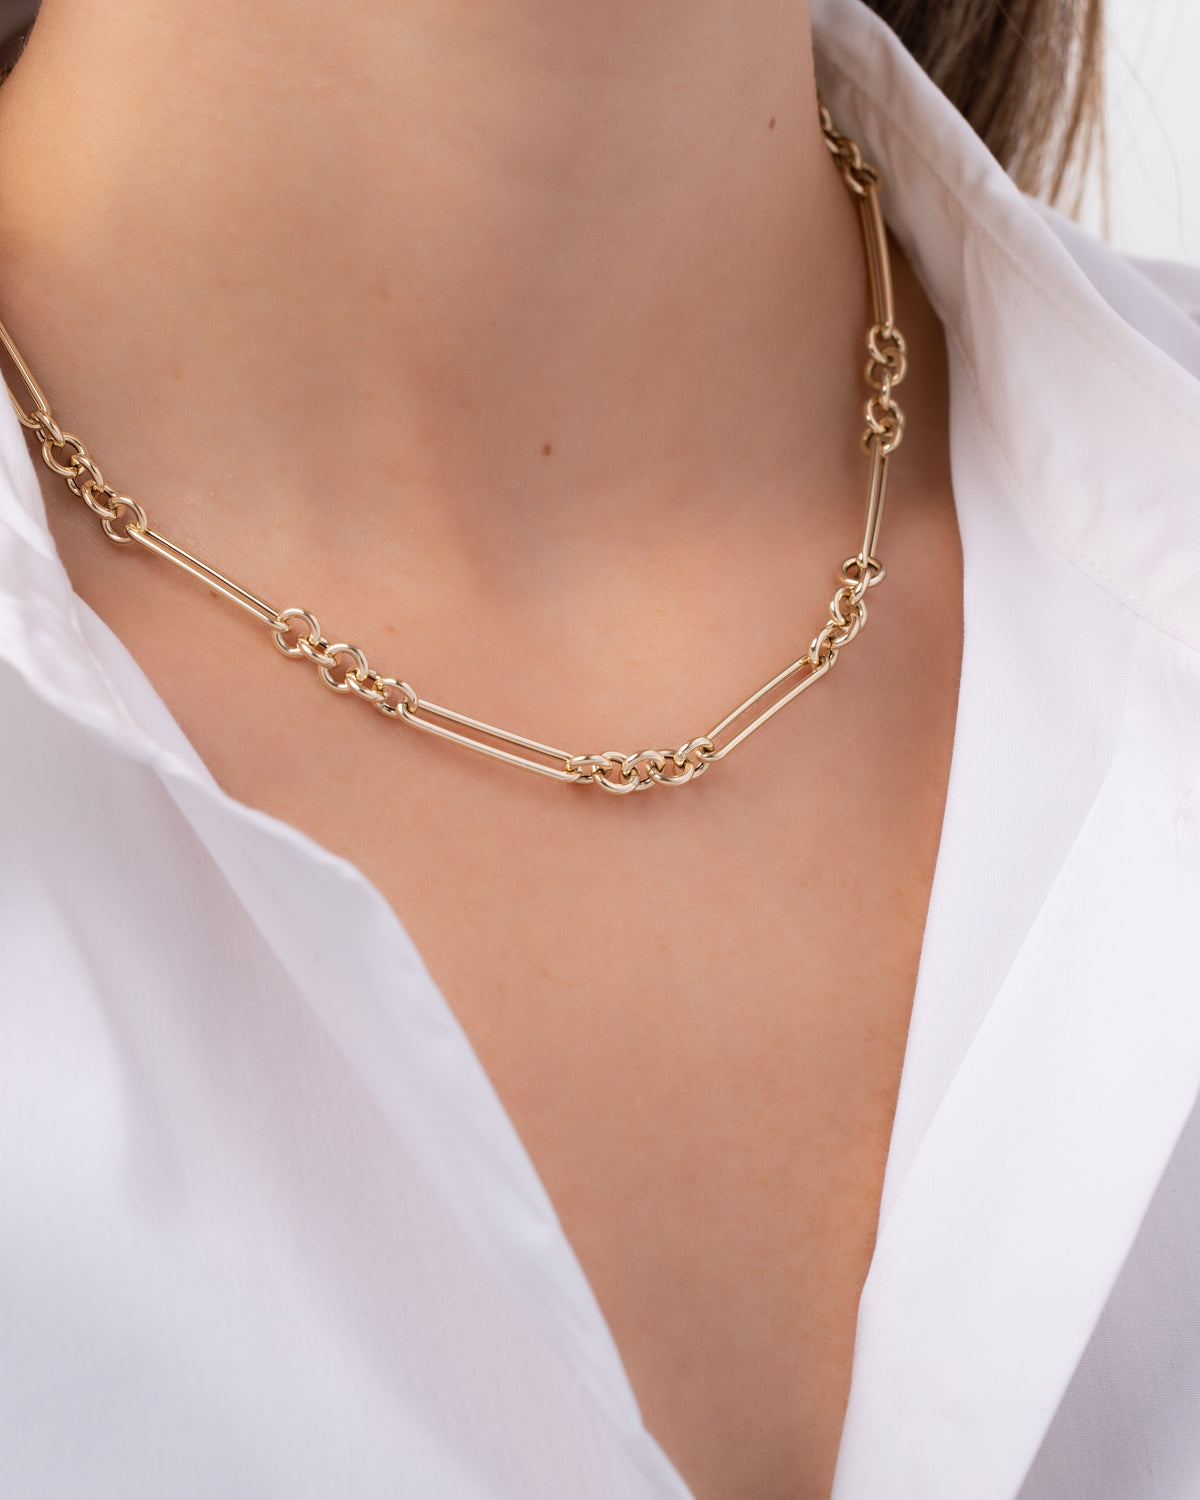 14K Gold Elongated Paper Clip Chain Necklace - Out of Stock